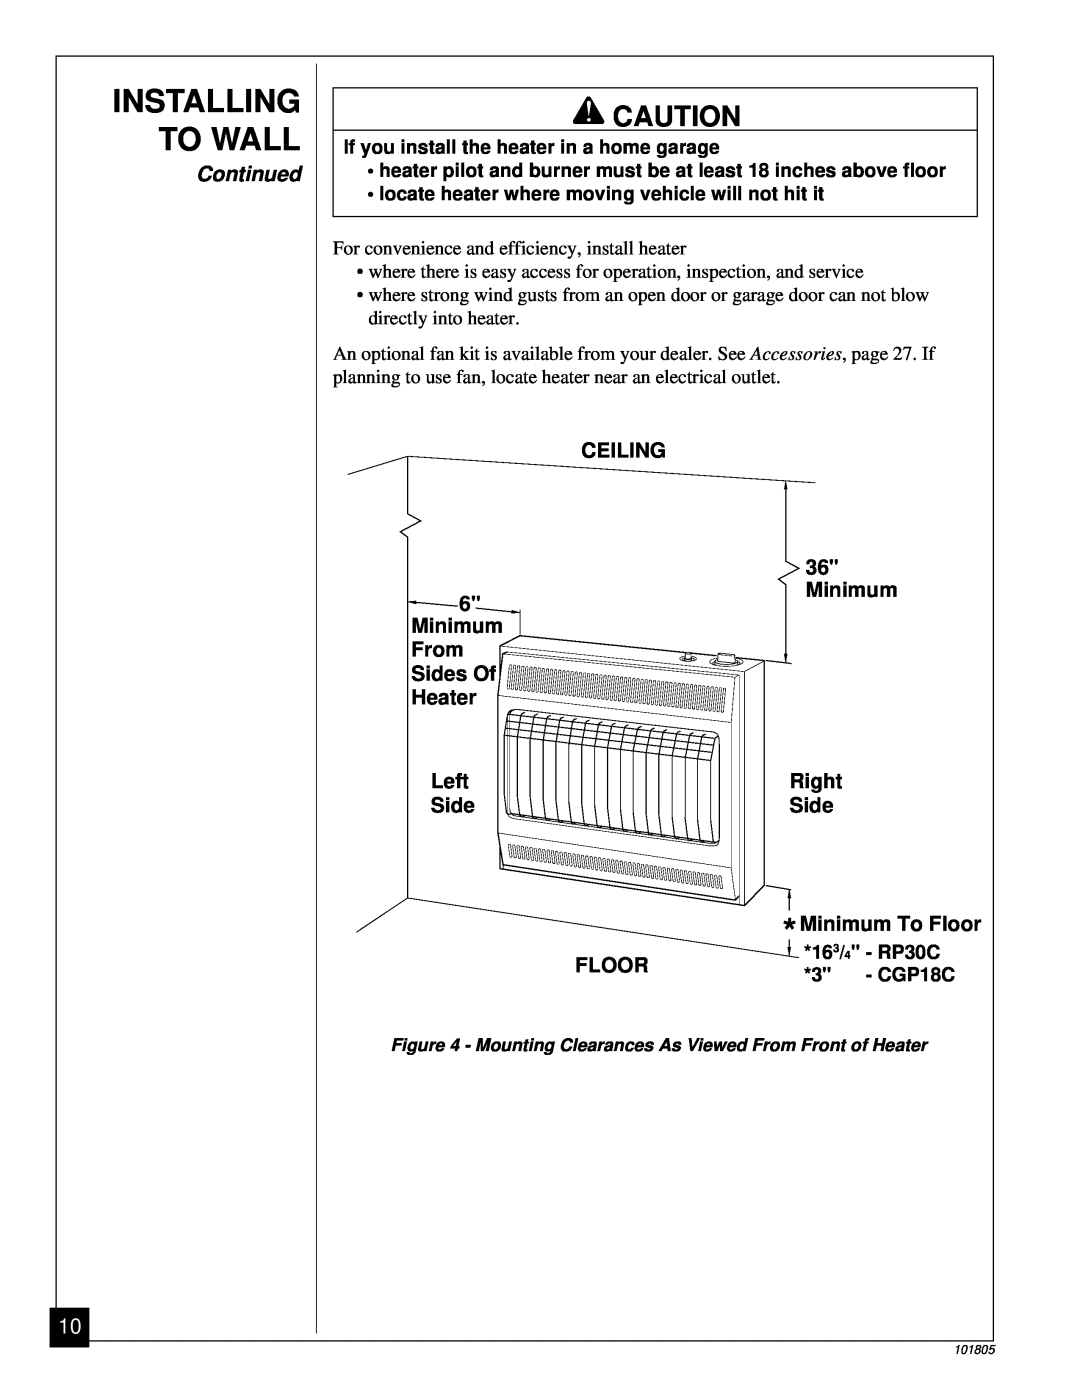 Desa CGP18C installation manual Installing To Wall, Continued, If you install the heater in a home garage, 163/4 - RP30C 